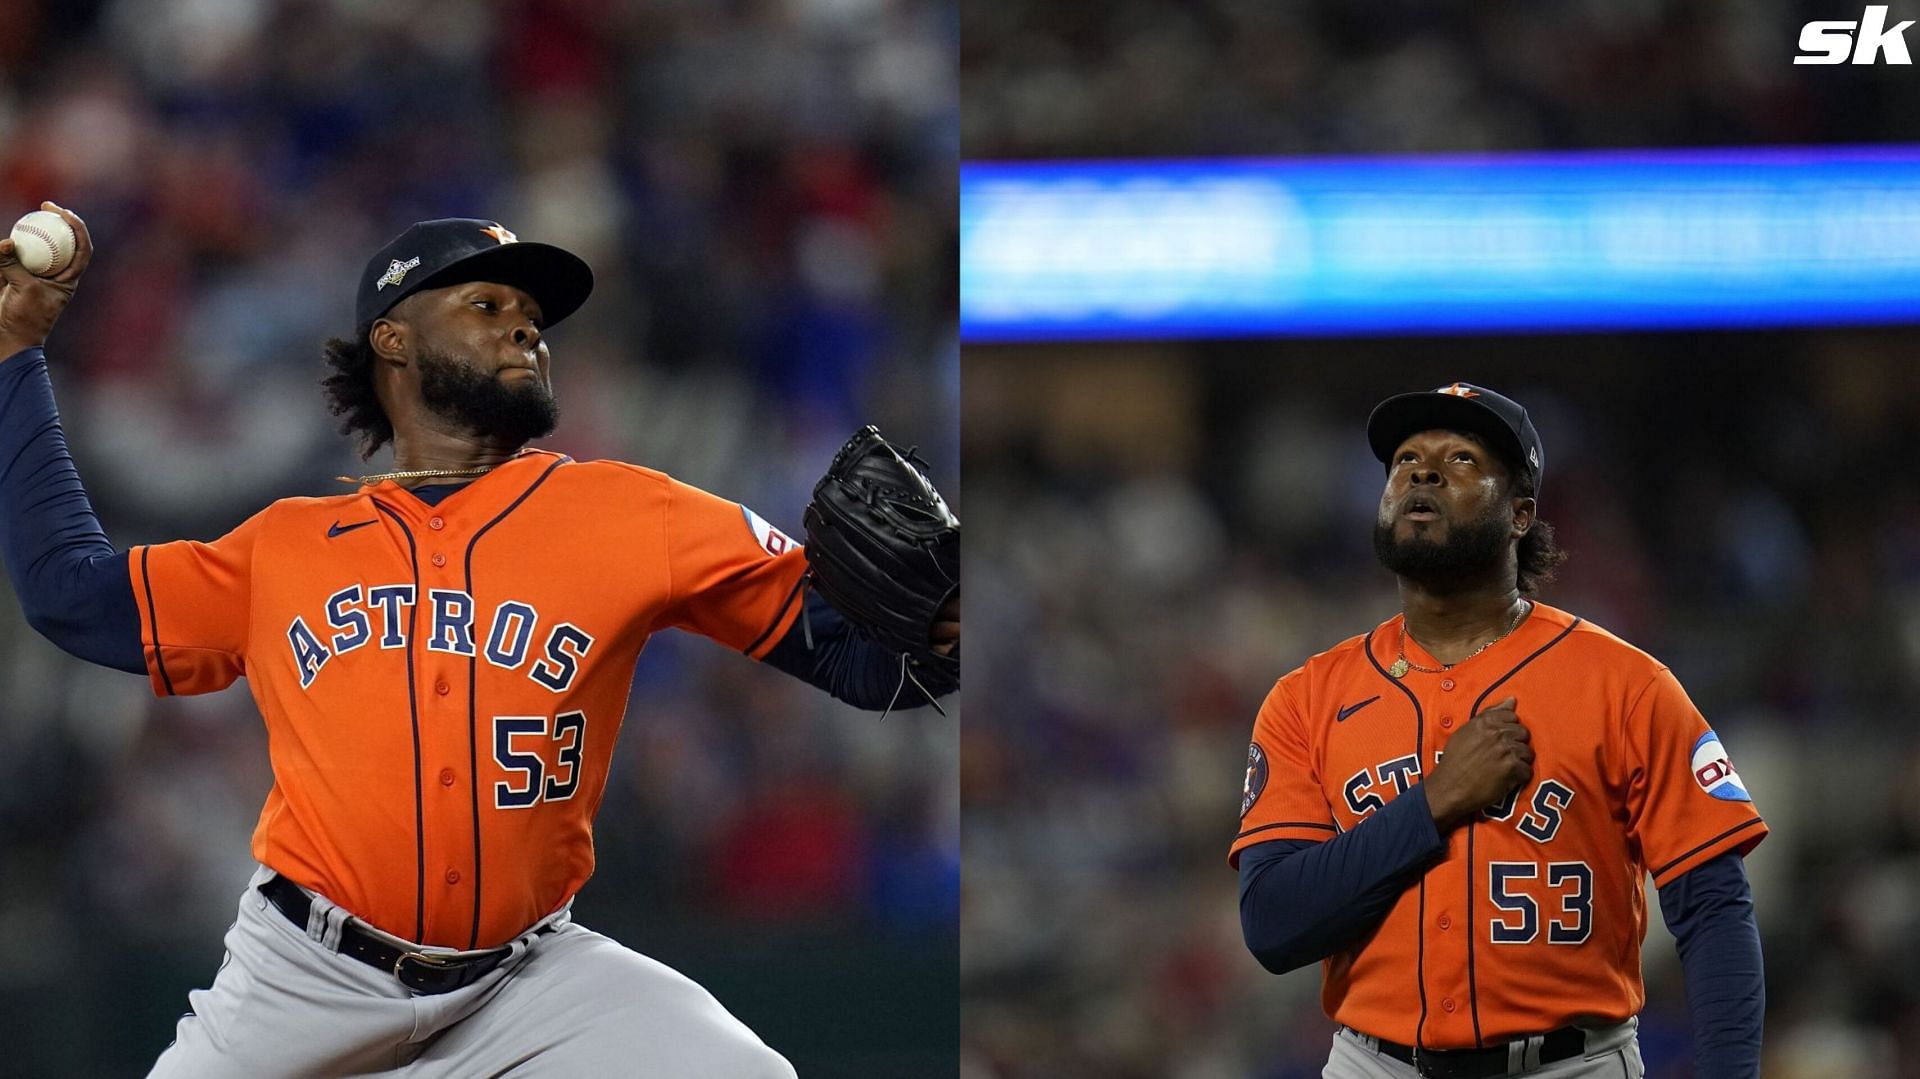 Cristian Javier looks back at his childhood idol Pedro Martinez after Astros